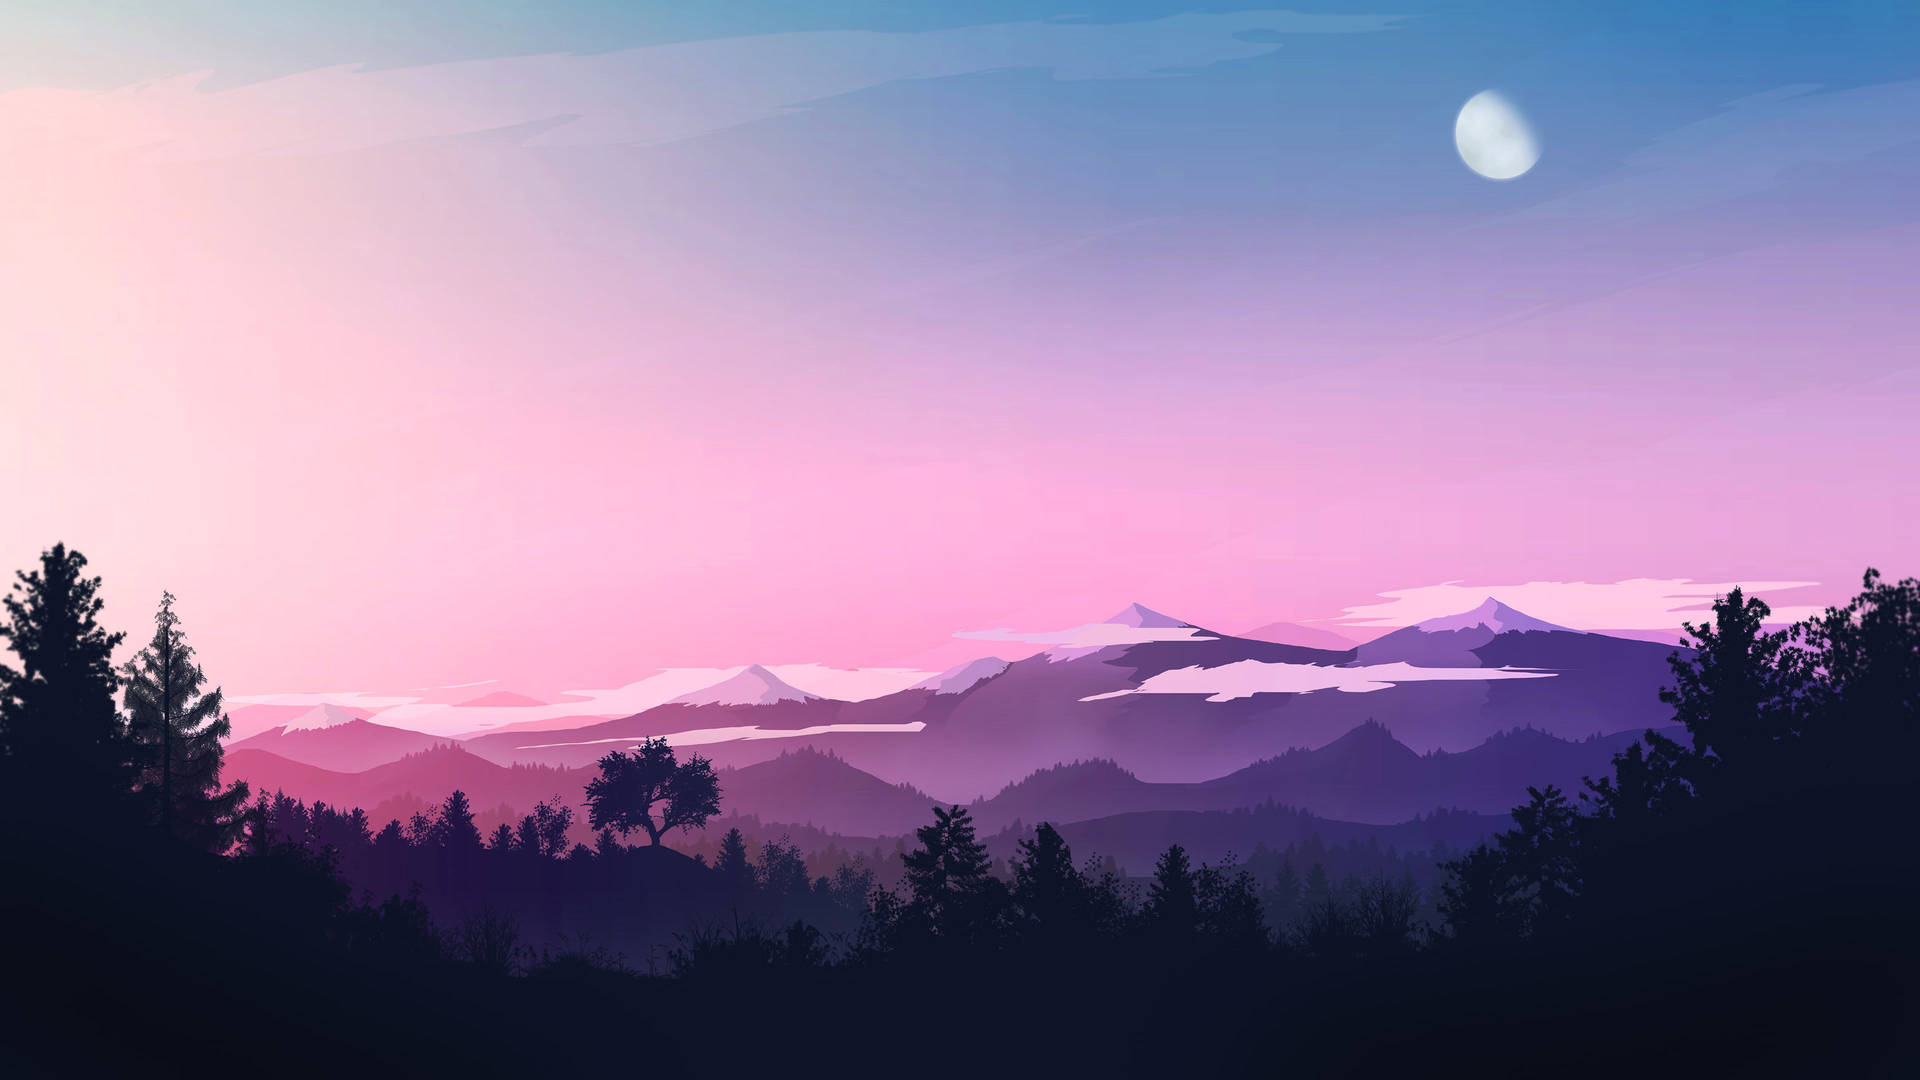 Hd Design Of Purple Mountain View Background